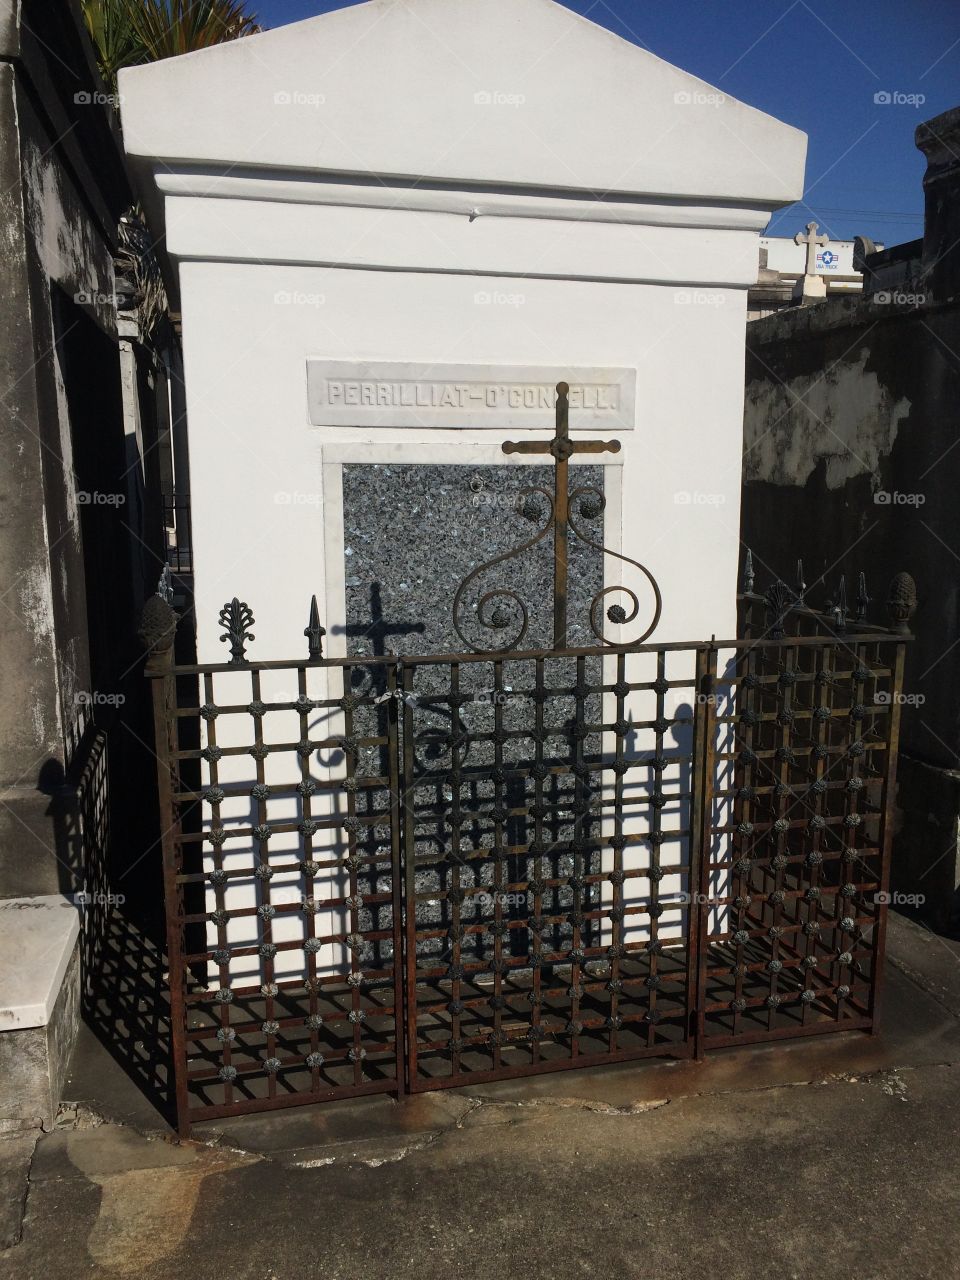 St. Louis cemetery in New Orleans 